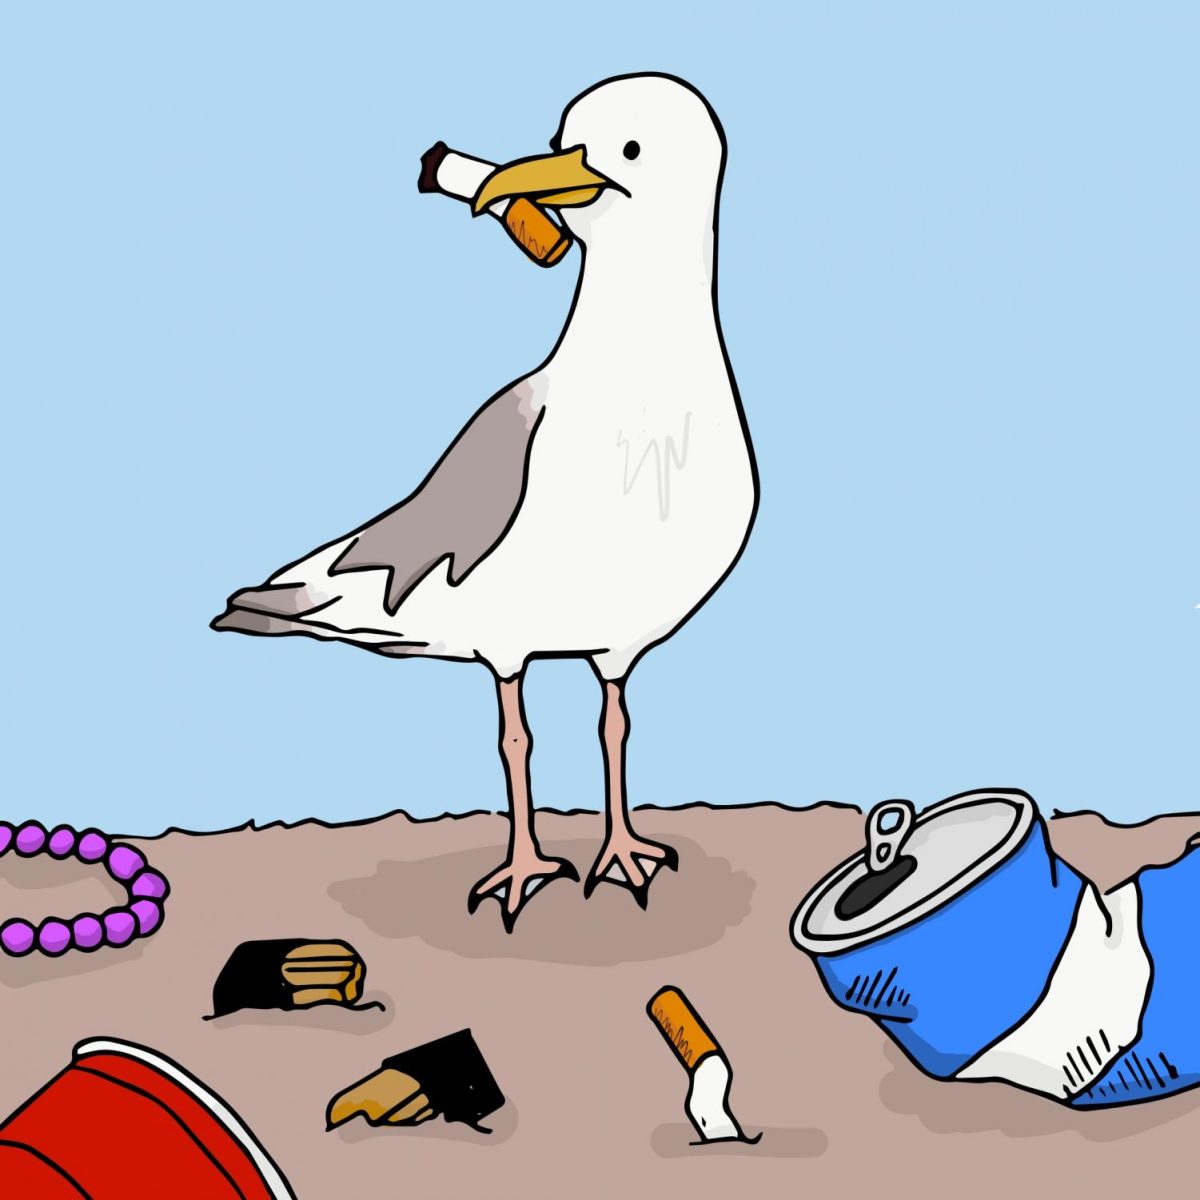 Seagull+with+a+cigarette+in+mouth+surrounded+by+trash.